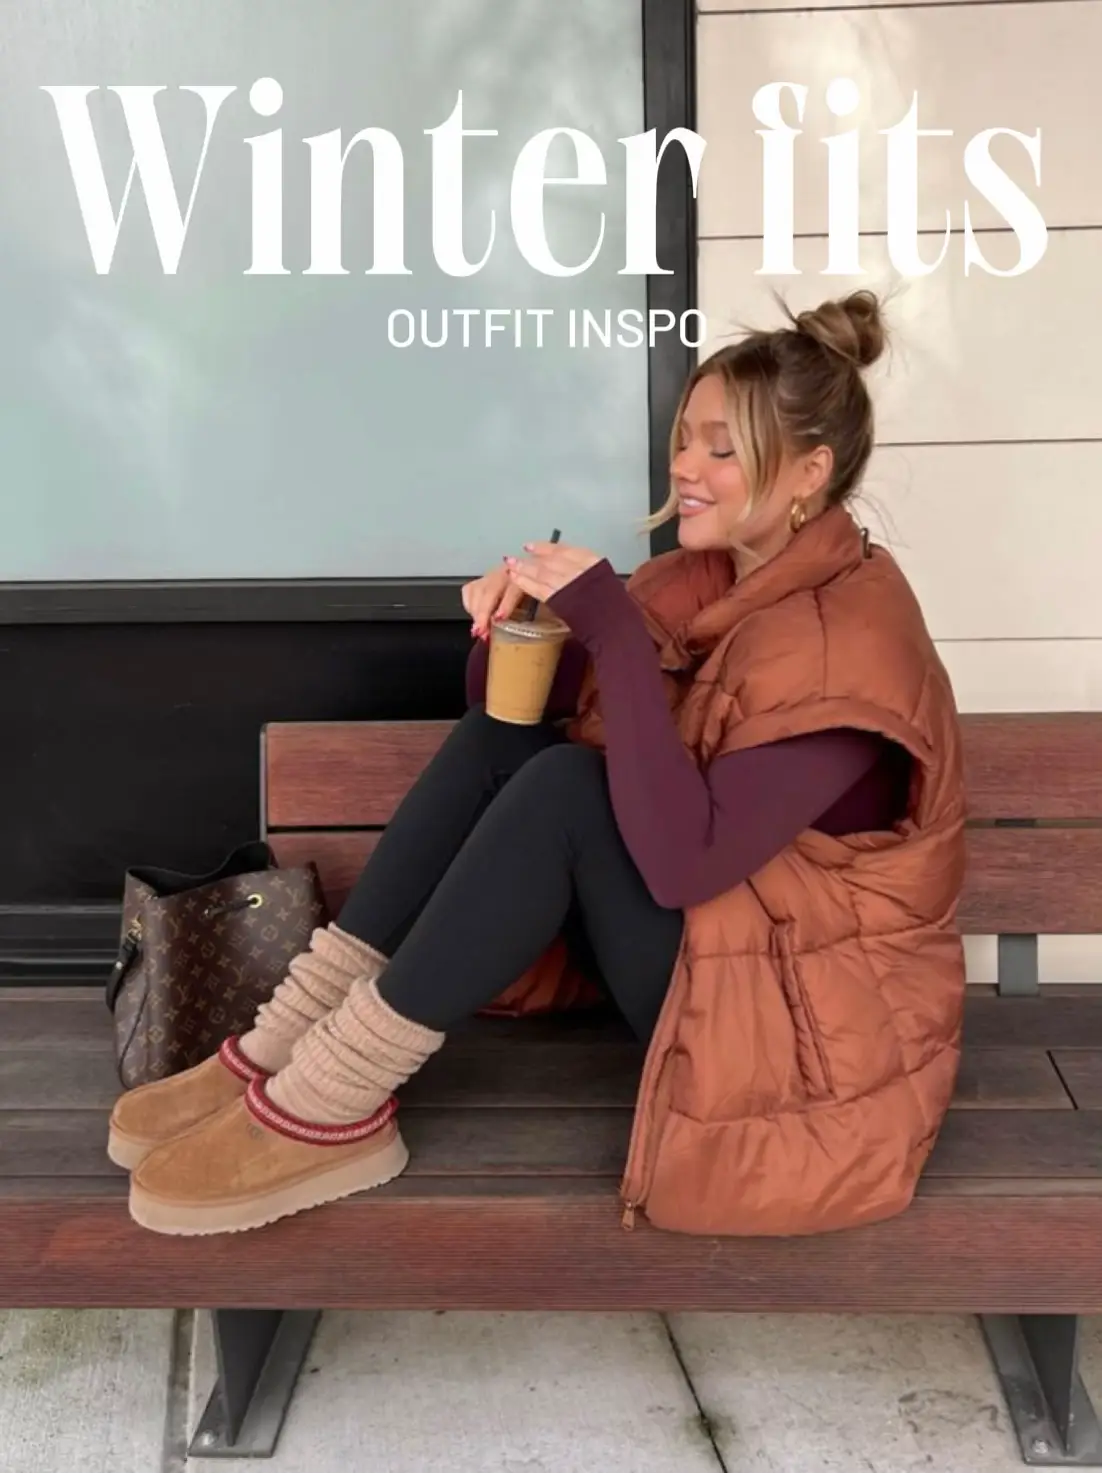 Pin by ✭𝐋𝐀𝐔𝐑𝐄𝐍✭ on P I C S  Cute outfits, Cozy winter outfits, Cute winter  outfits